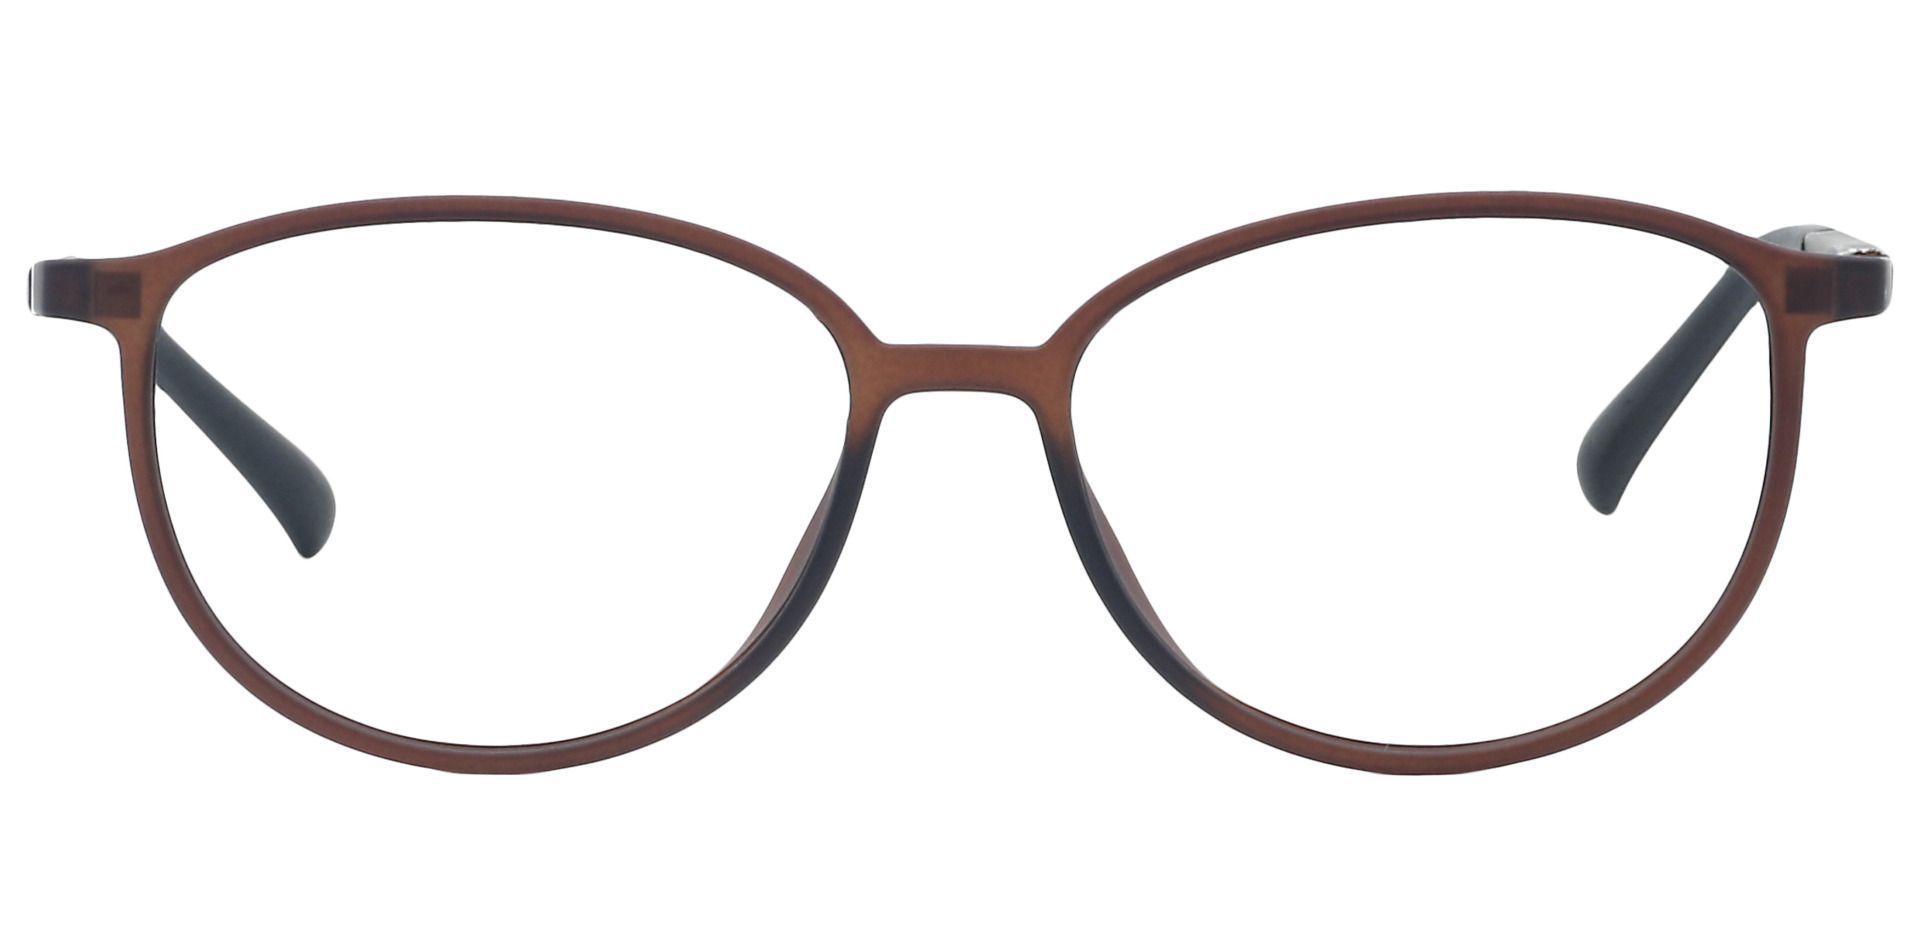 Melbourne Oval Reading Glasses - Brown